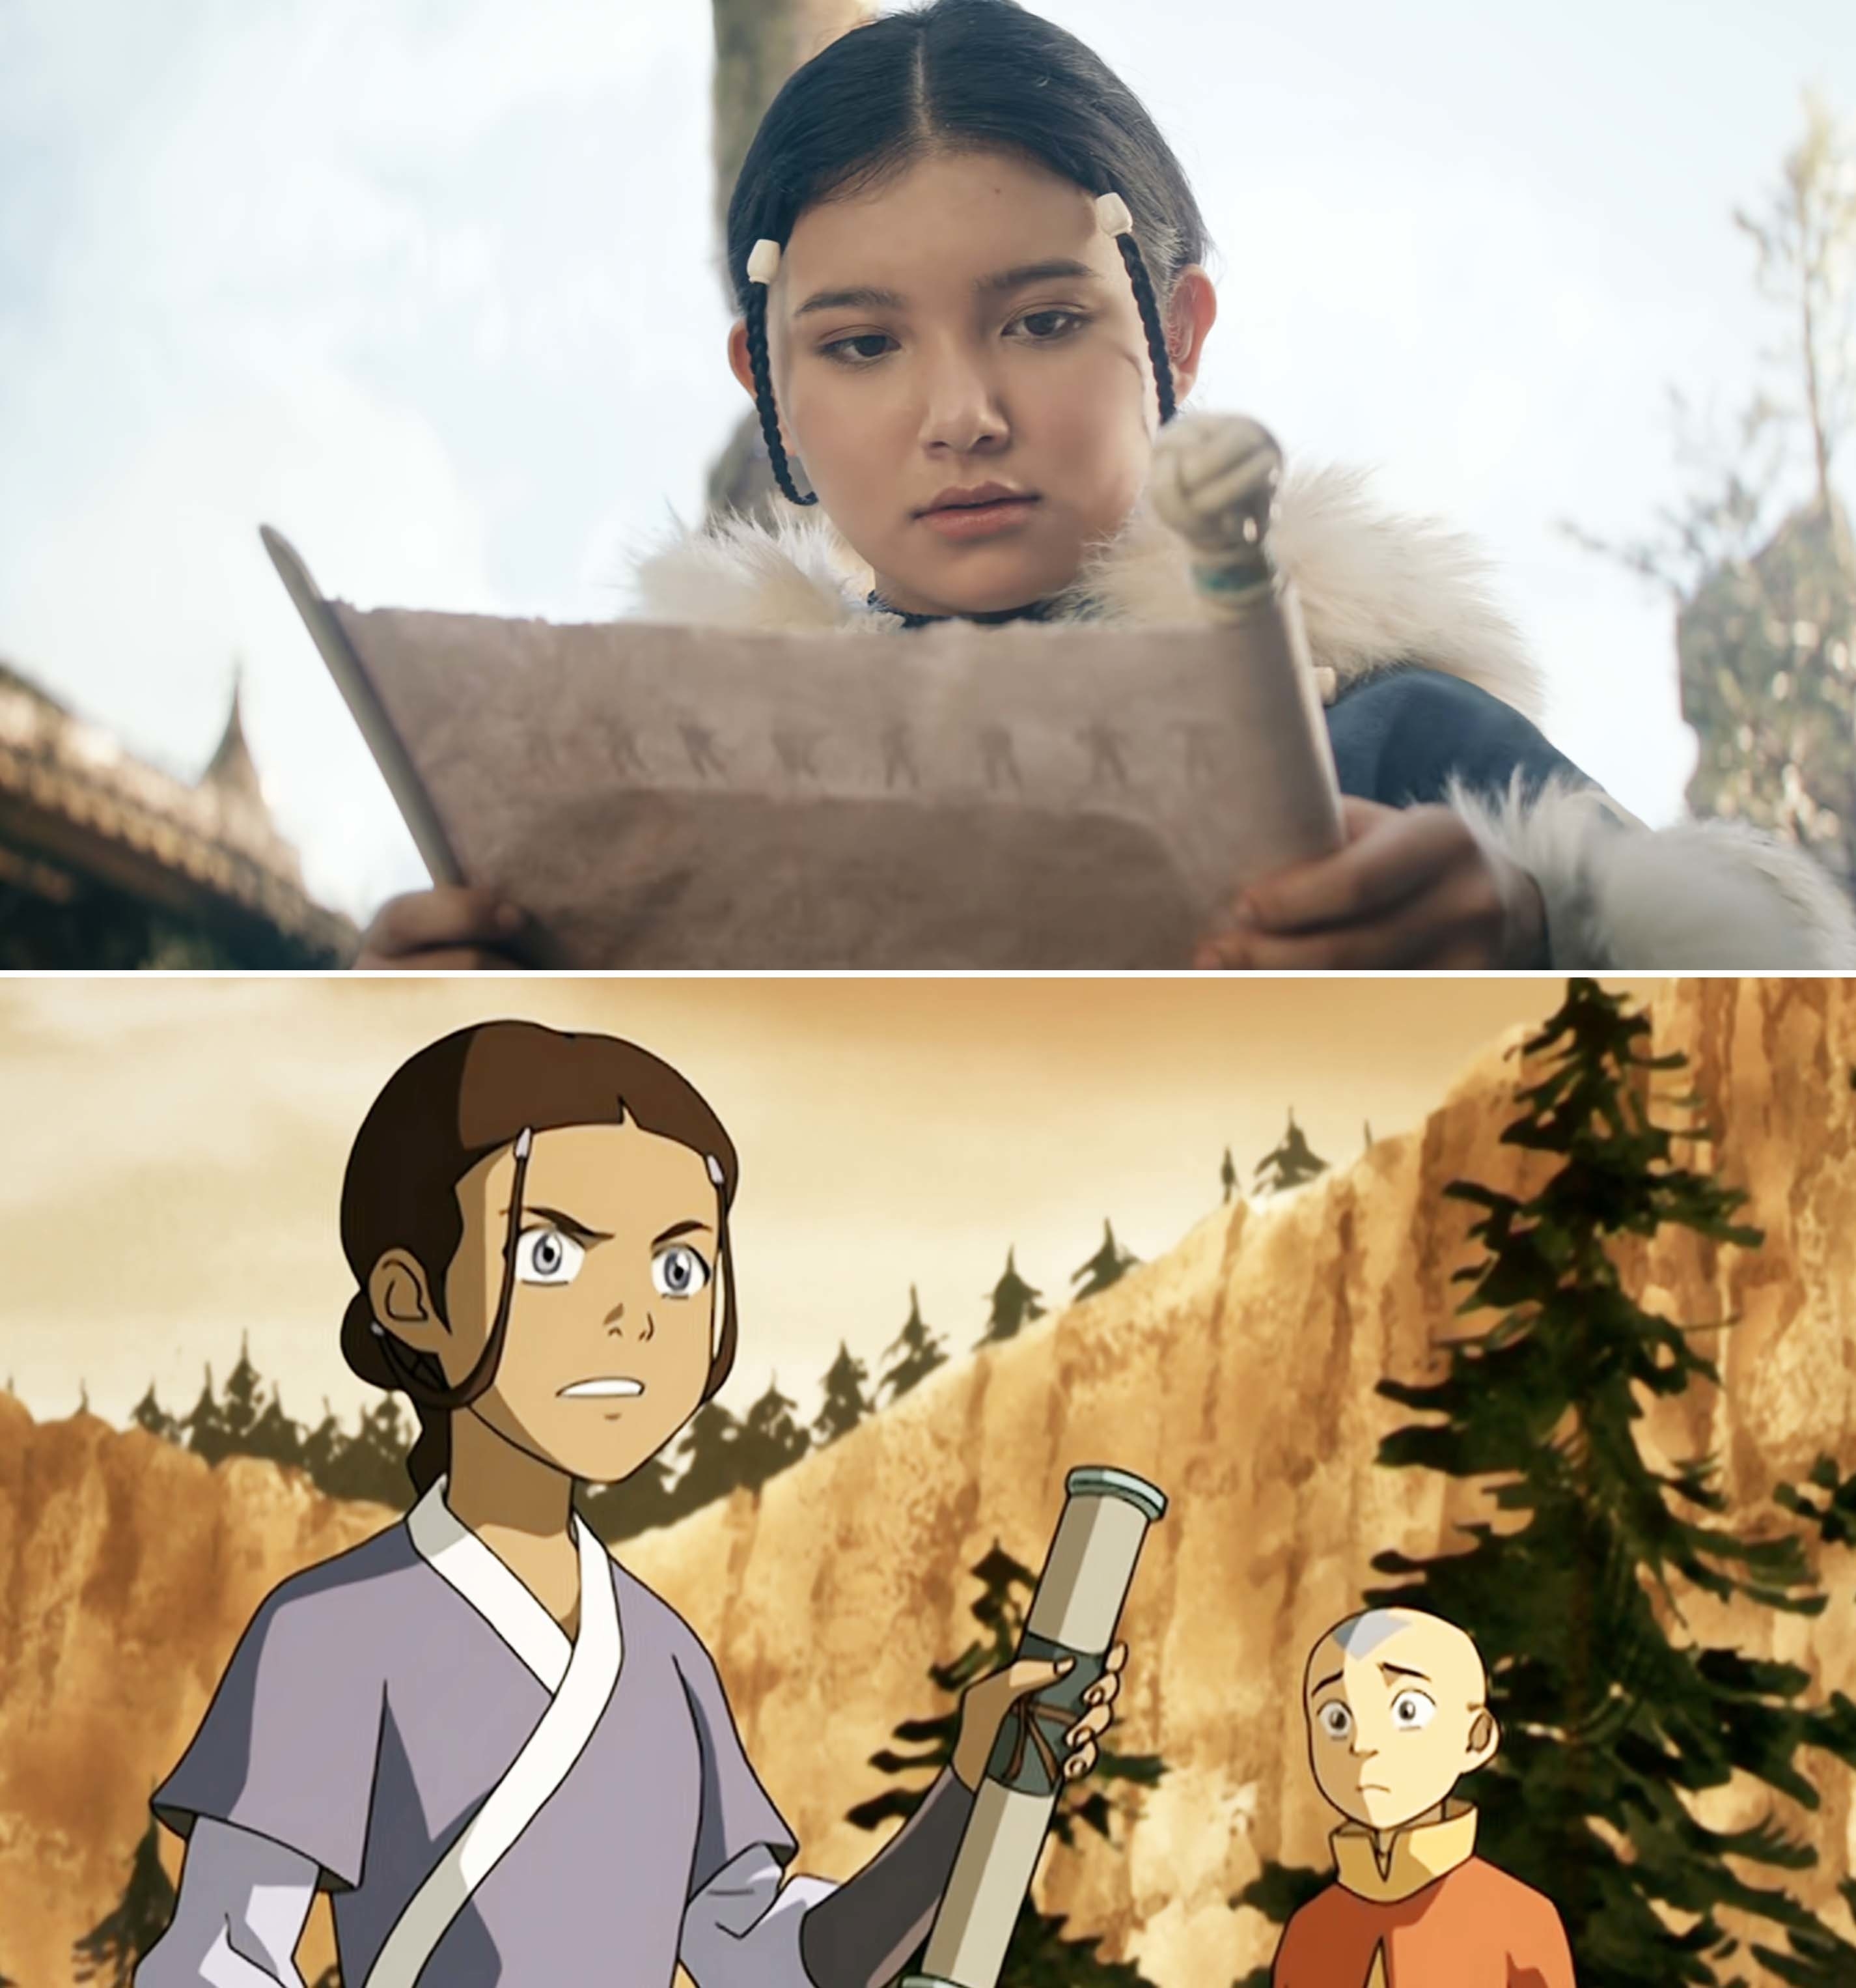 the live action character reading the scroll, and the animated character with the scroll in hand